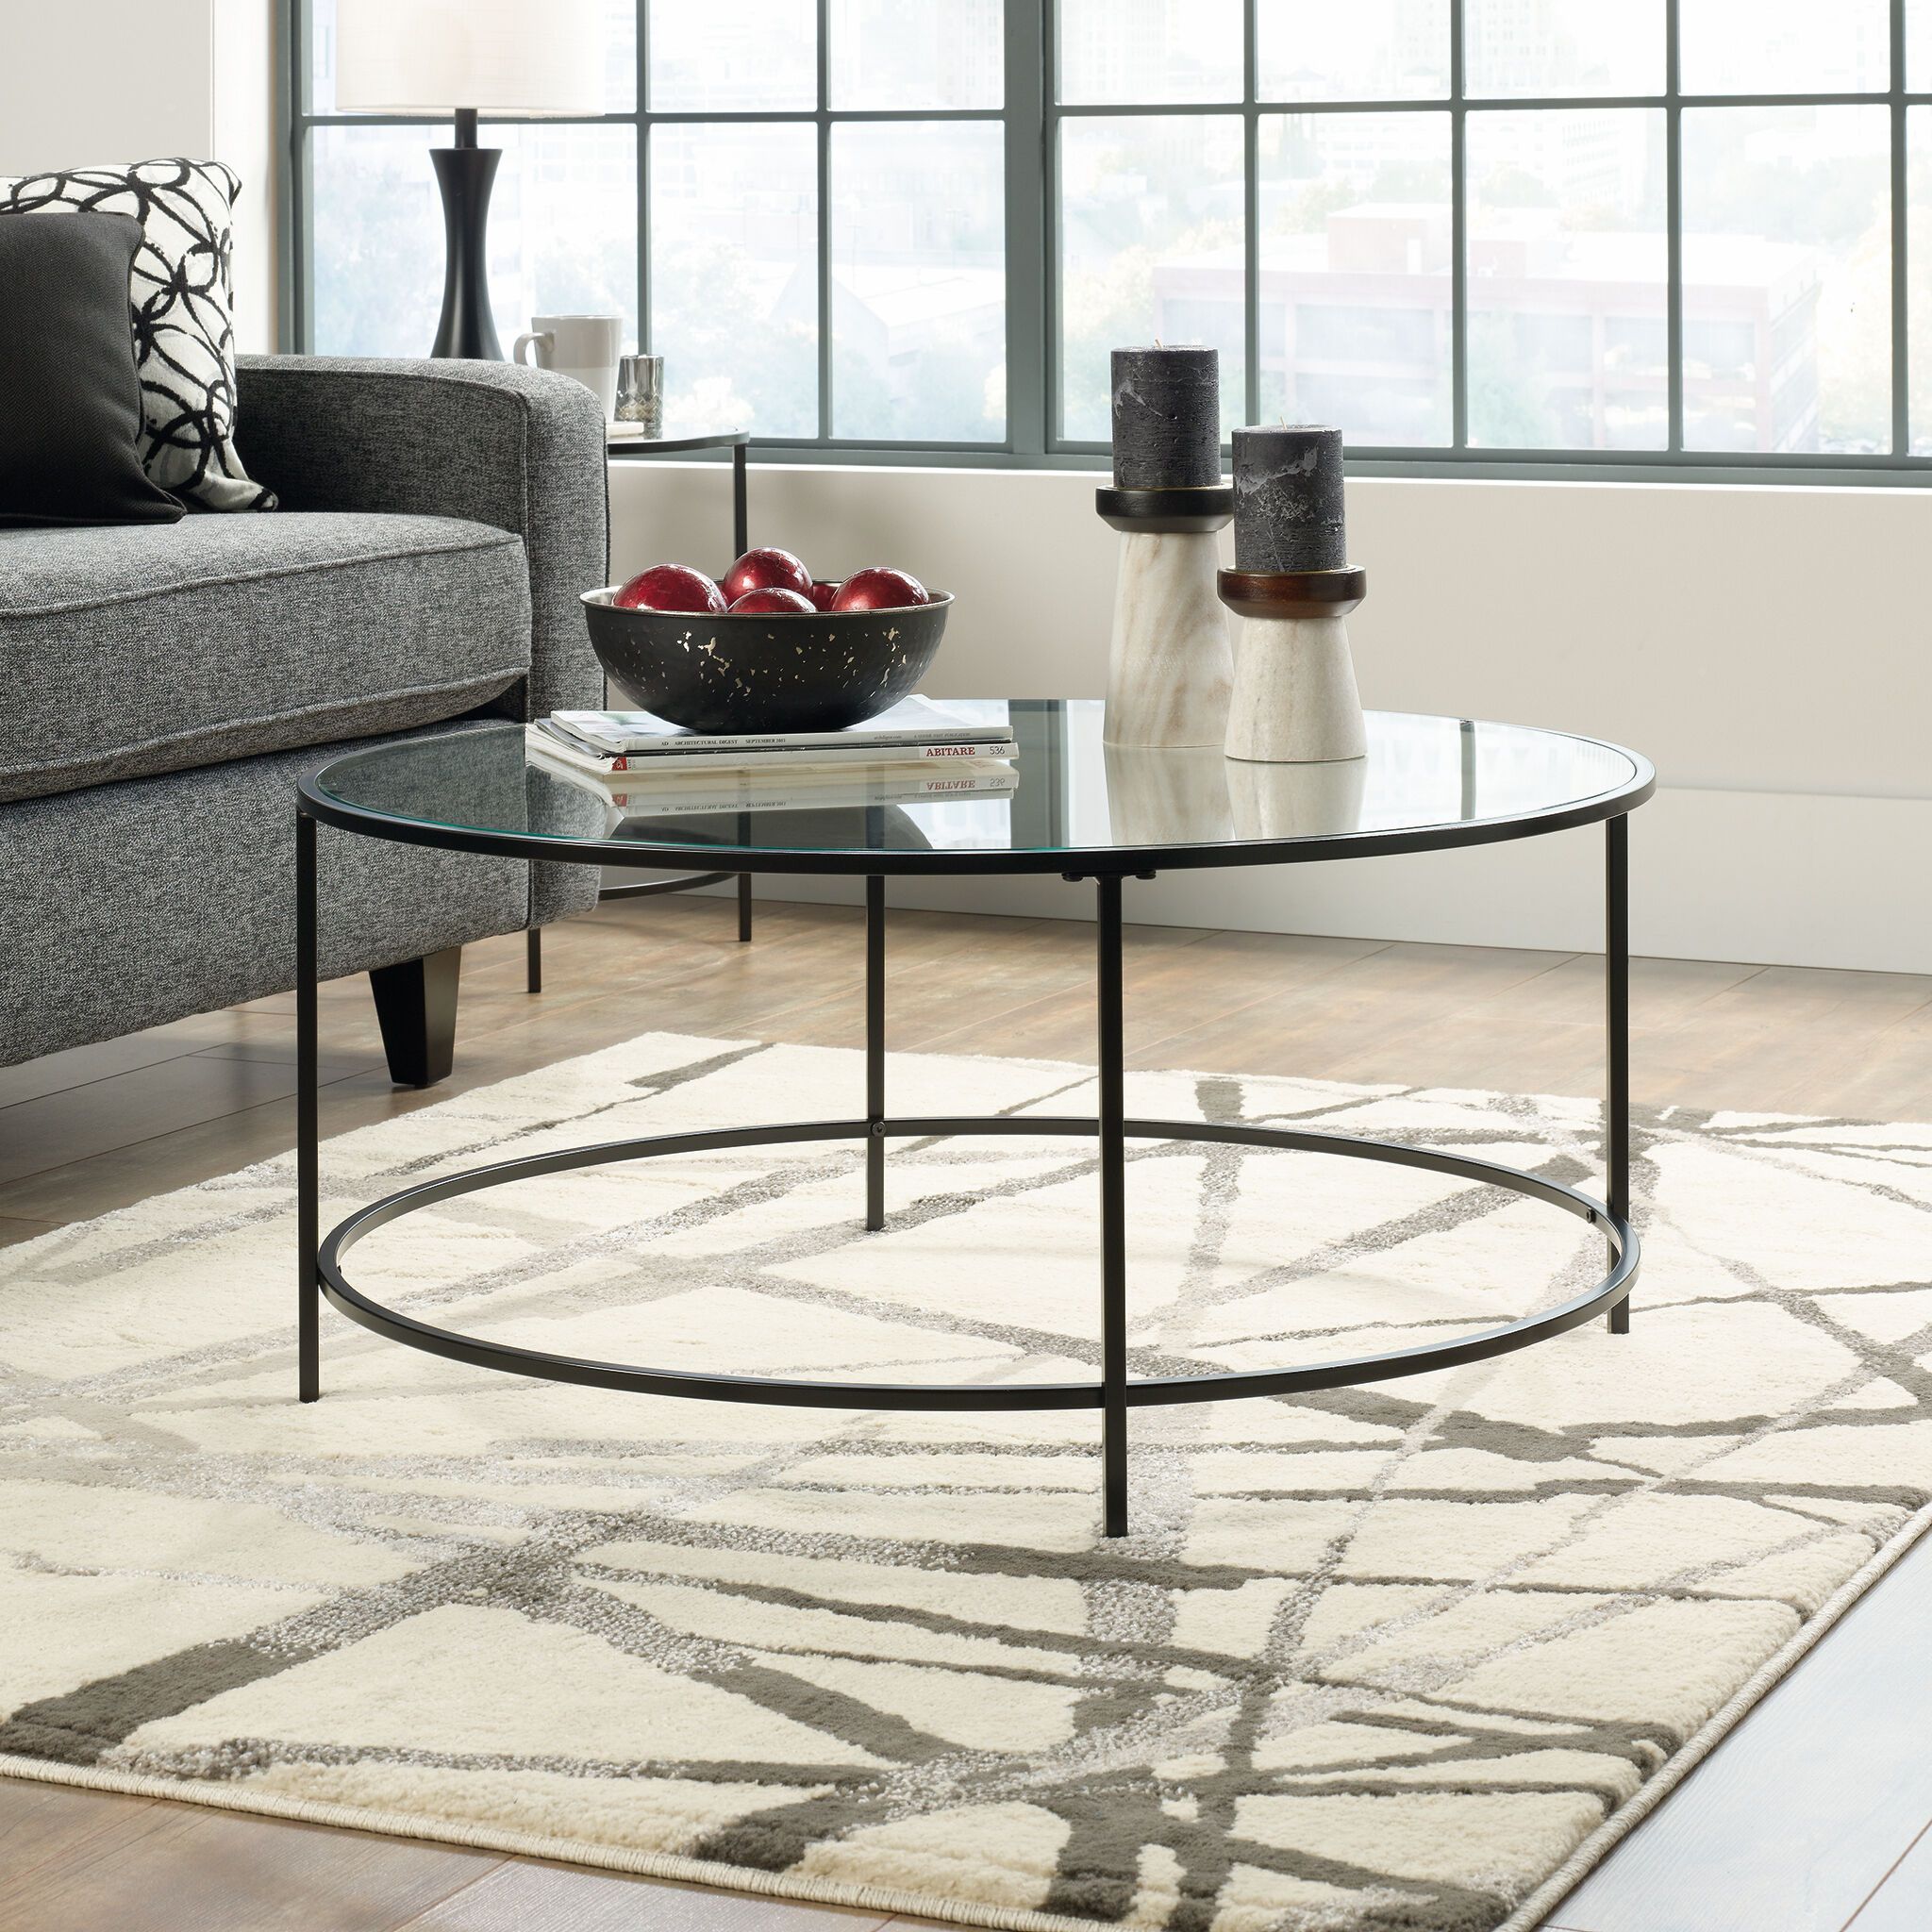 Round Contemporary Coffee Table In Black | Mathis Brothers Furniture Inside Full Black Round Coffee Tables (View 2 of 15)